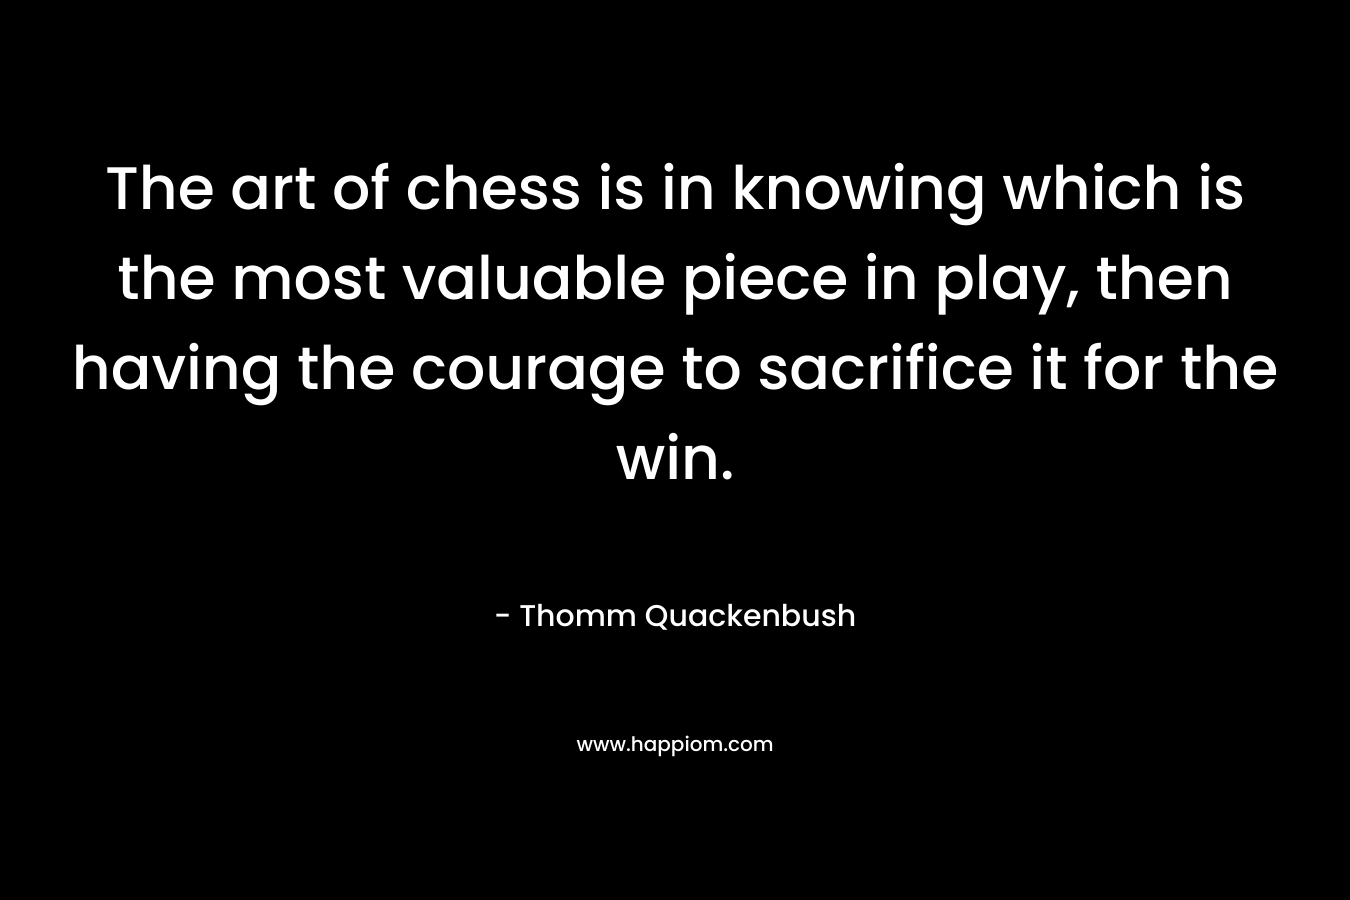 The art of chess is in knowing which is the most valuable piece in play, then having the courage to sacrifice it for the win.